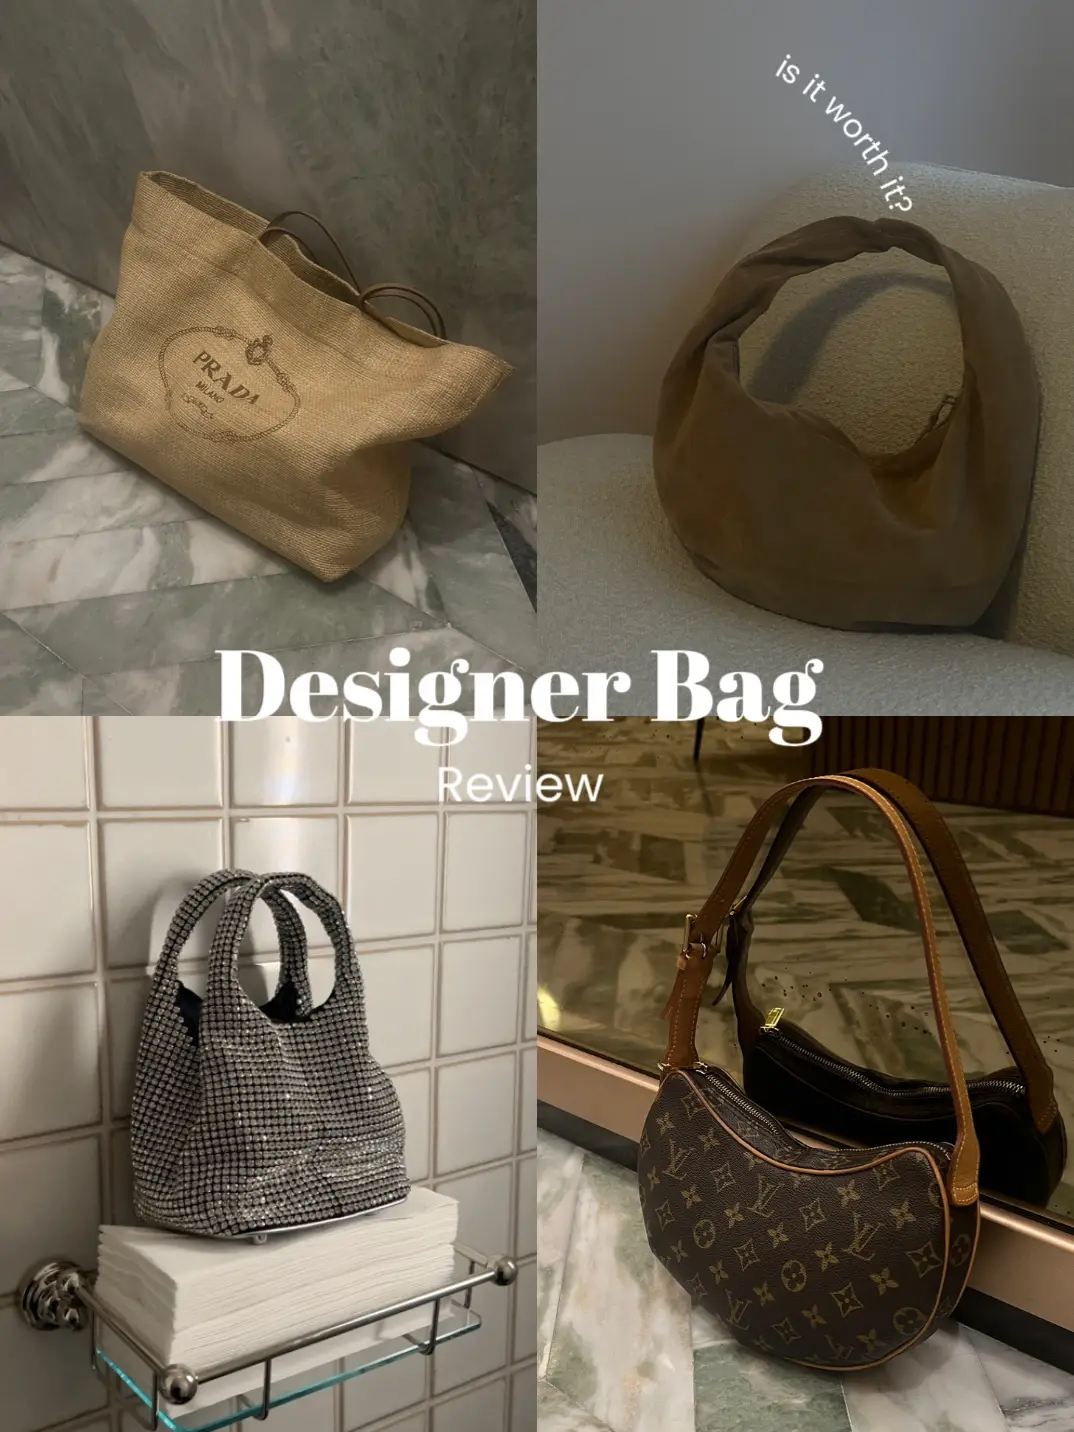 My Favorite Designer Bags, Gallery posted by Ashley Weiner